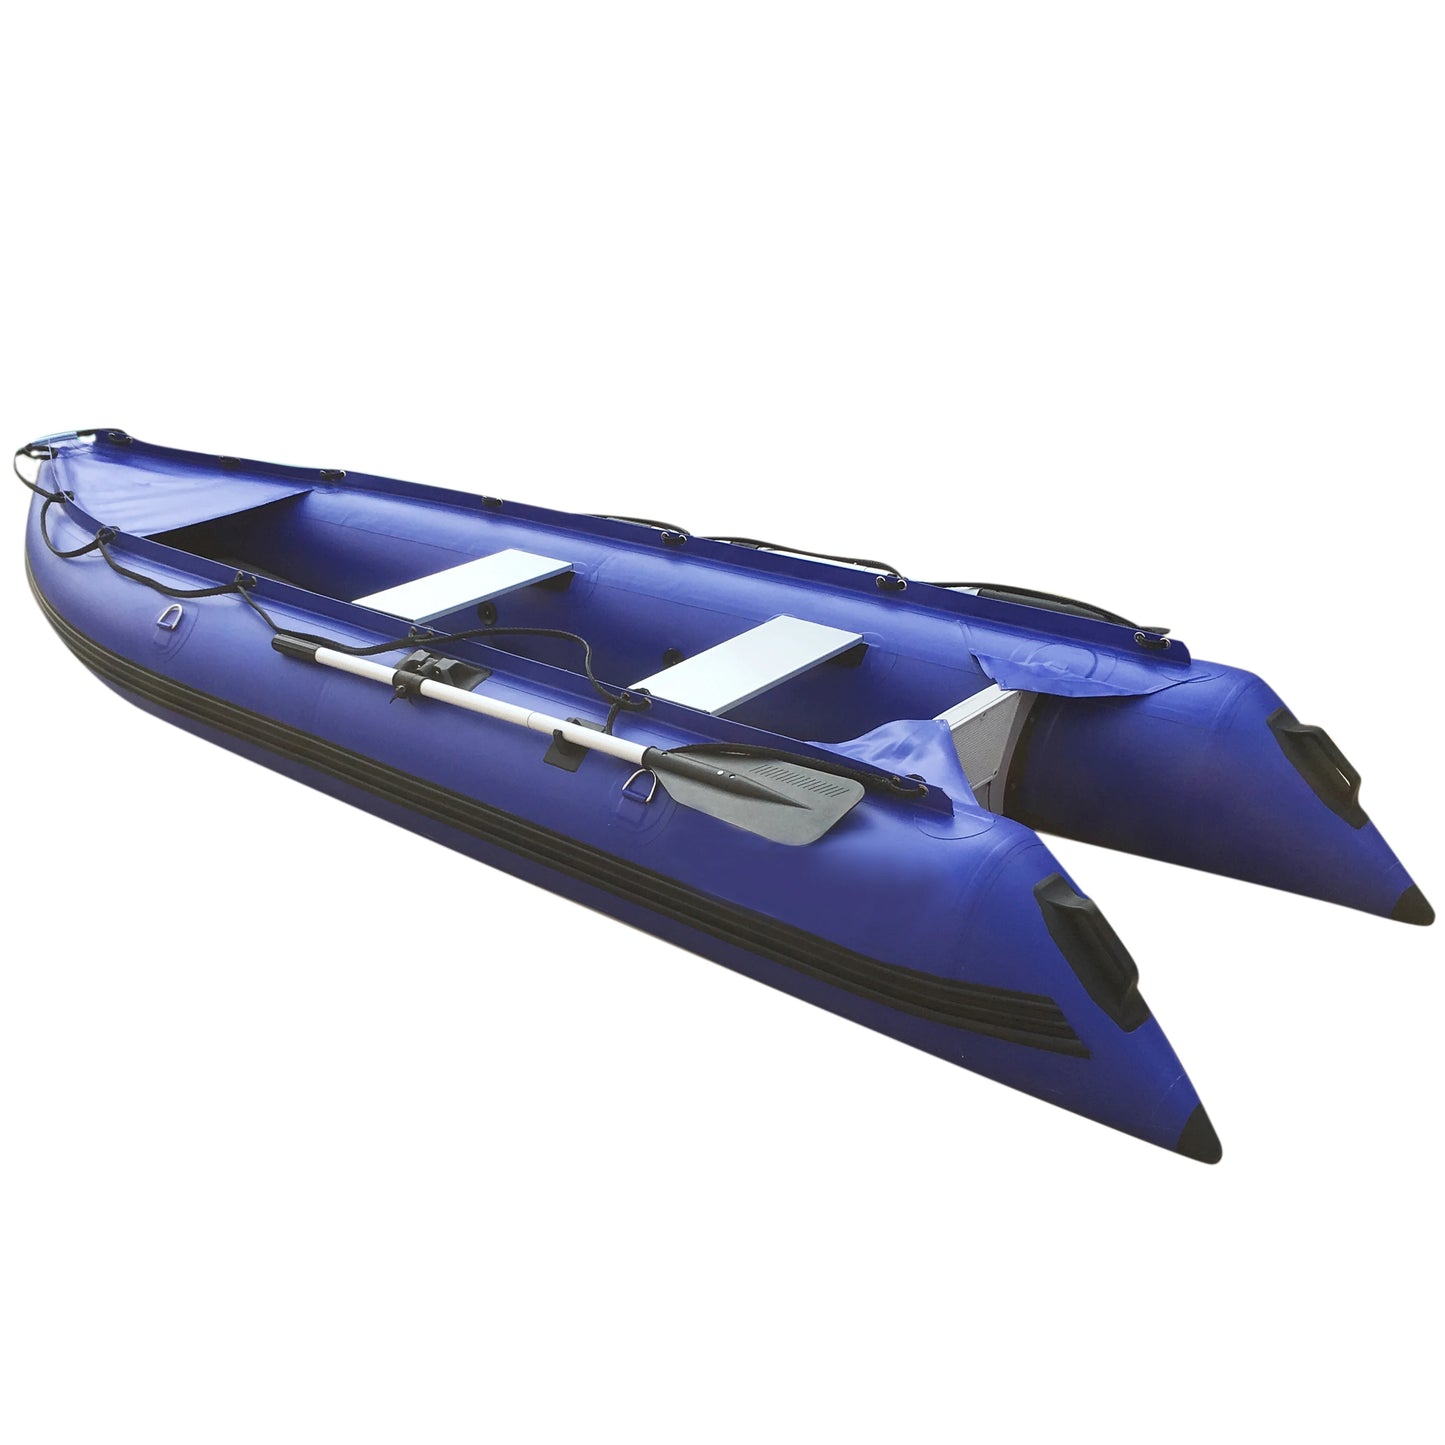 Goboat GTK370 Inflatable Boat CE PVC Outdoor Bluewater 2 Persons Carp Fishing Kayak Drifting Rowing Camping Equipment